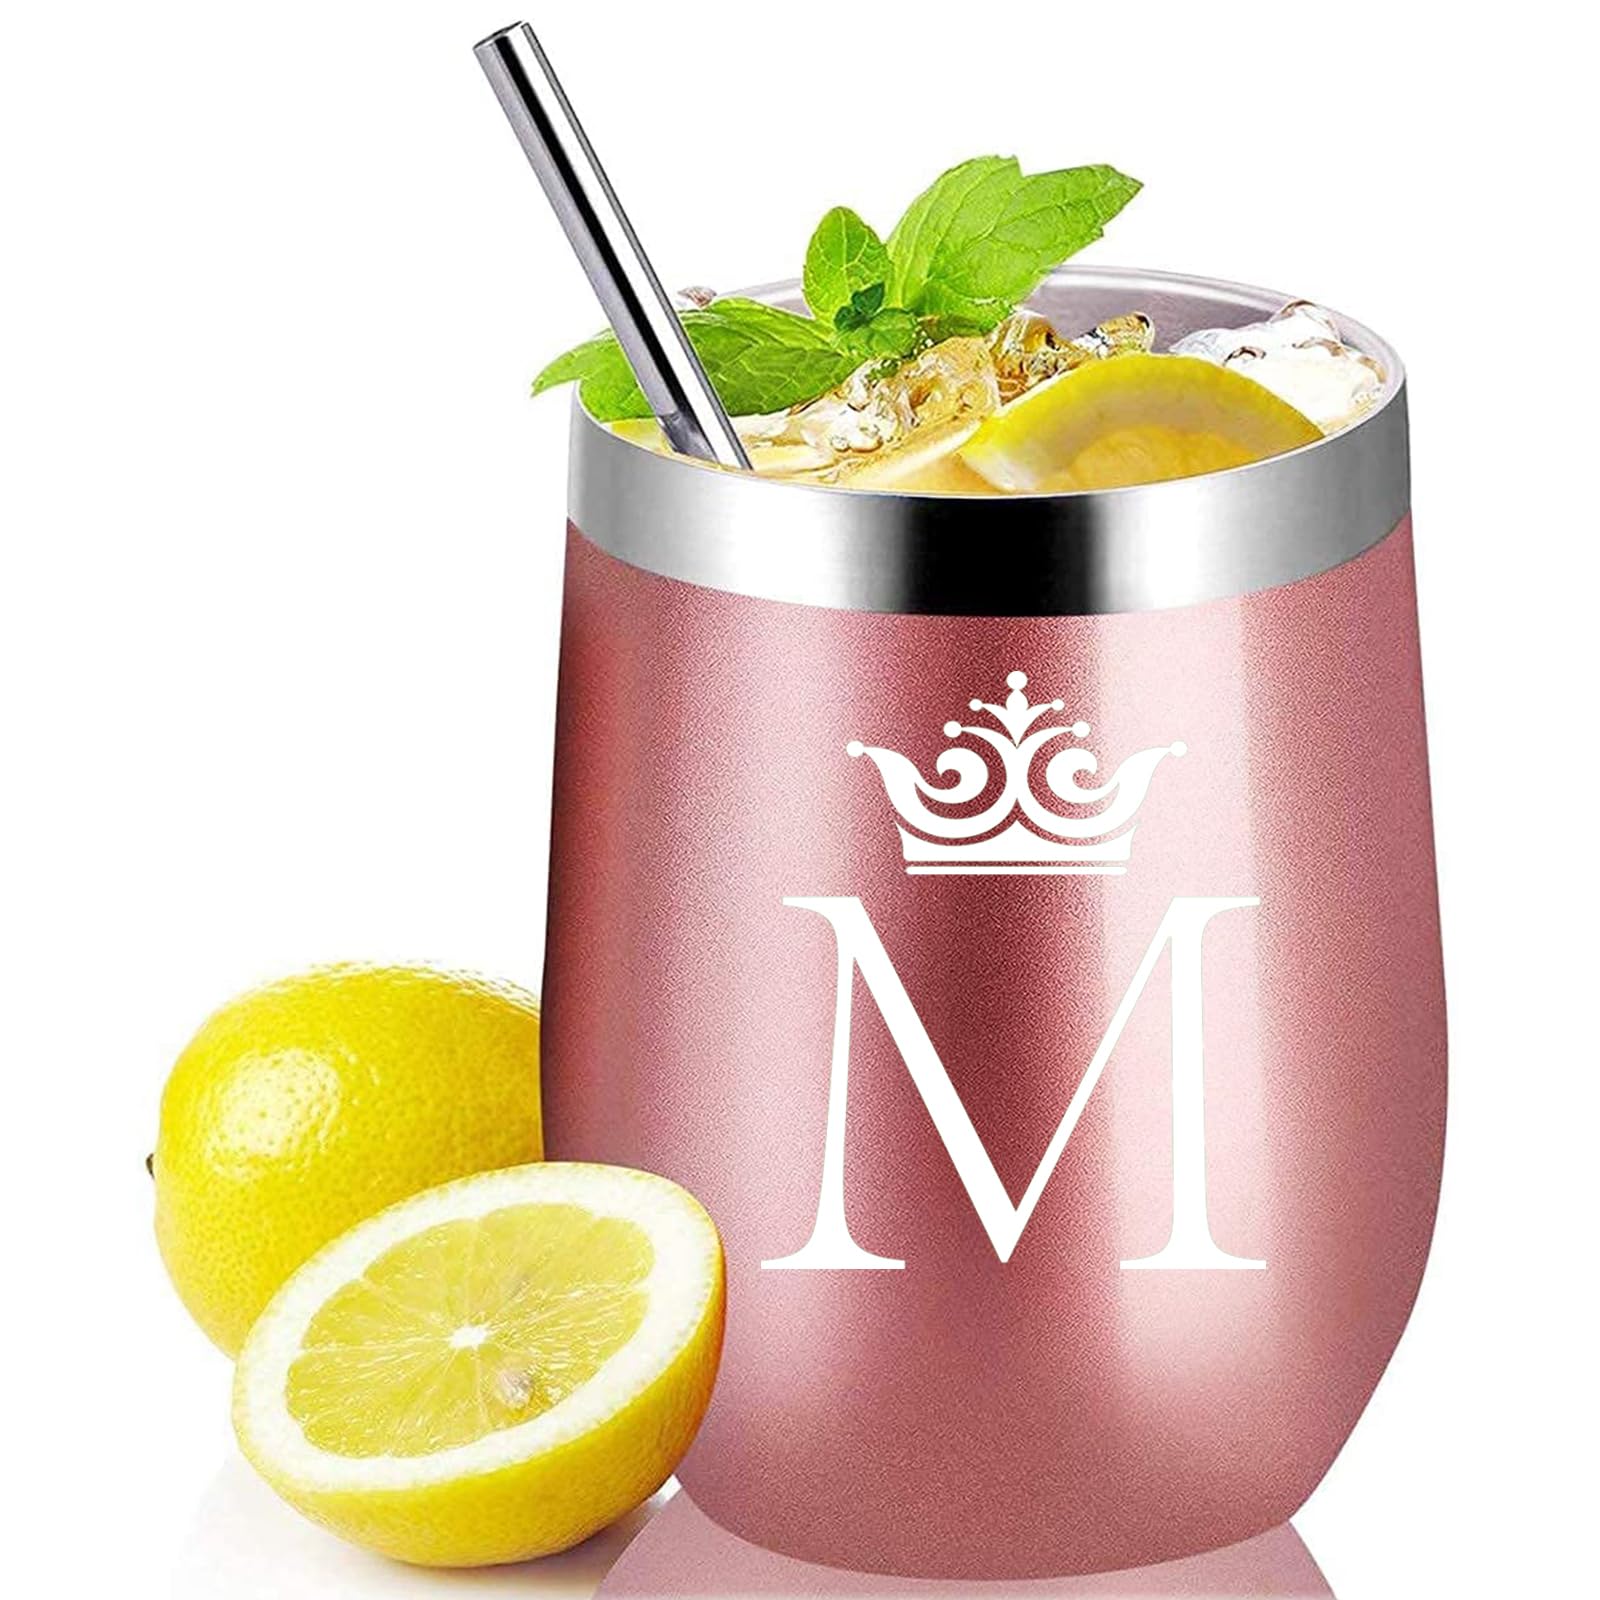 COFOZA Letter M Initial Gifts for Woman Men 12 Oz Stainless Steel Wine Tumbler Drink Cup Monogram Mug Personalized Birthday Wedding Bridesmaid Proposal Engagement Christmas Gift (M)